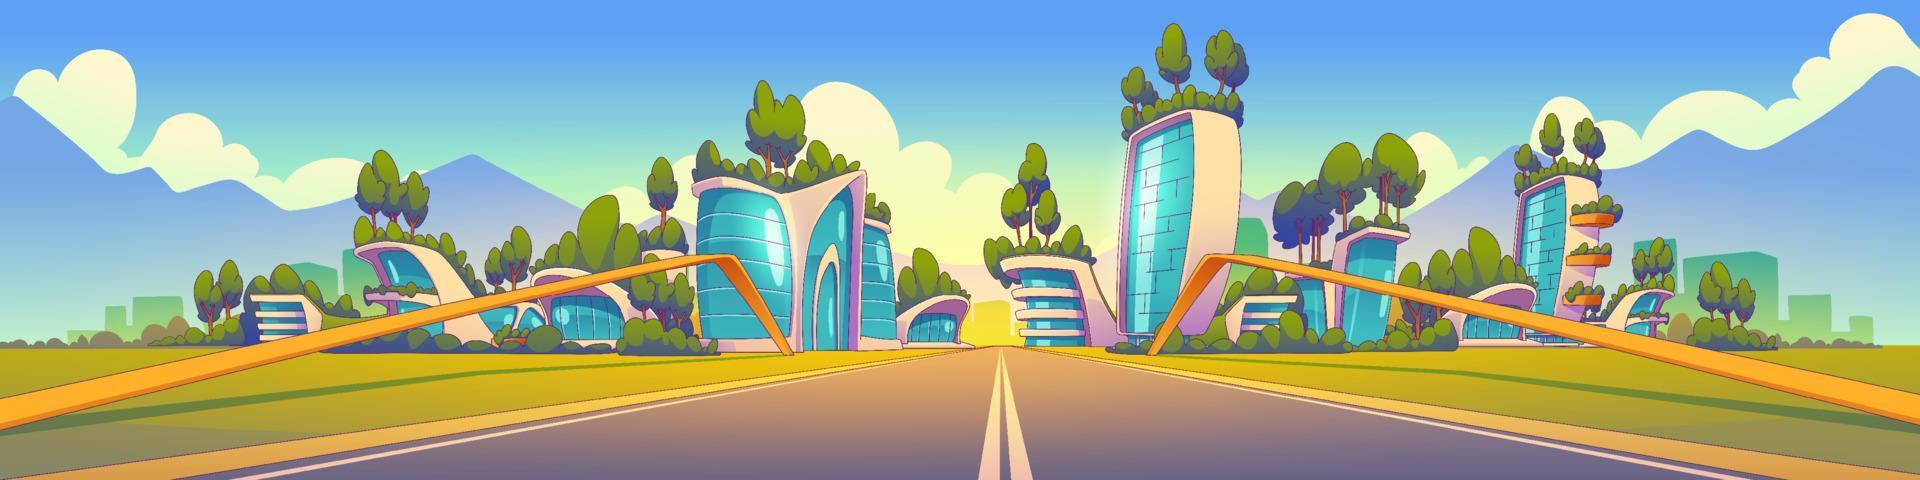 Cityscape with road and modern eco buildings vector